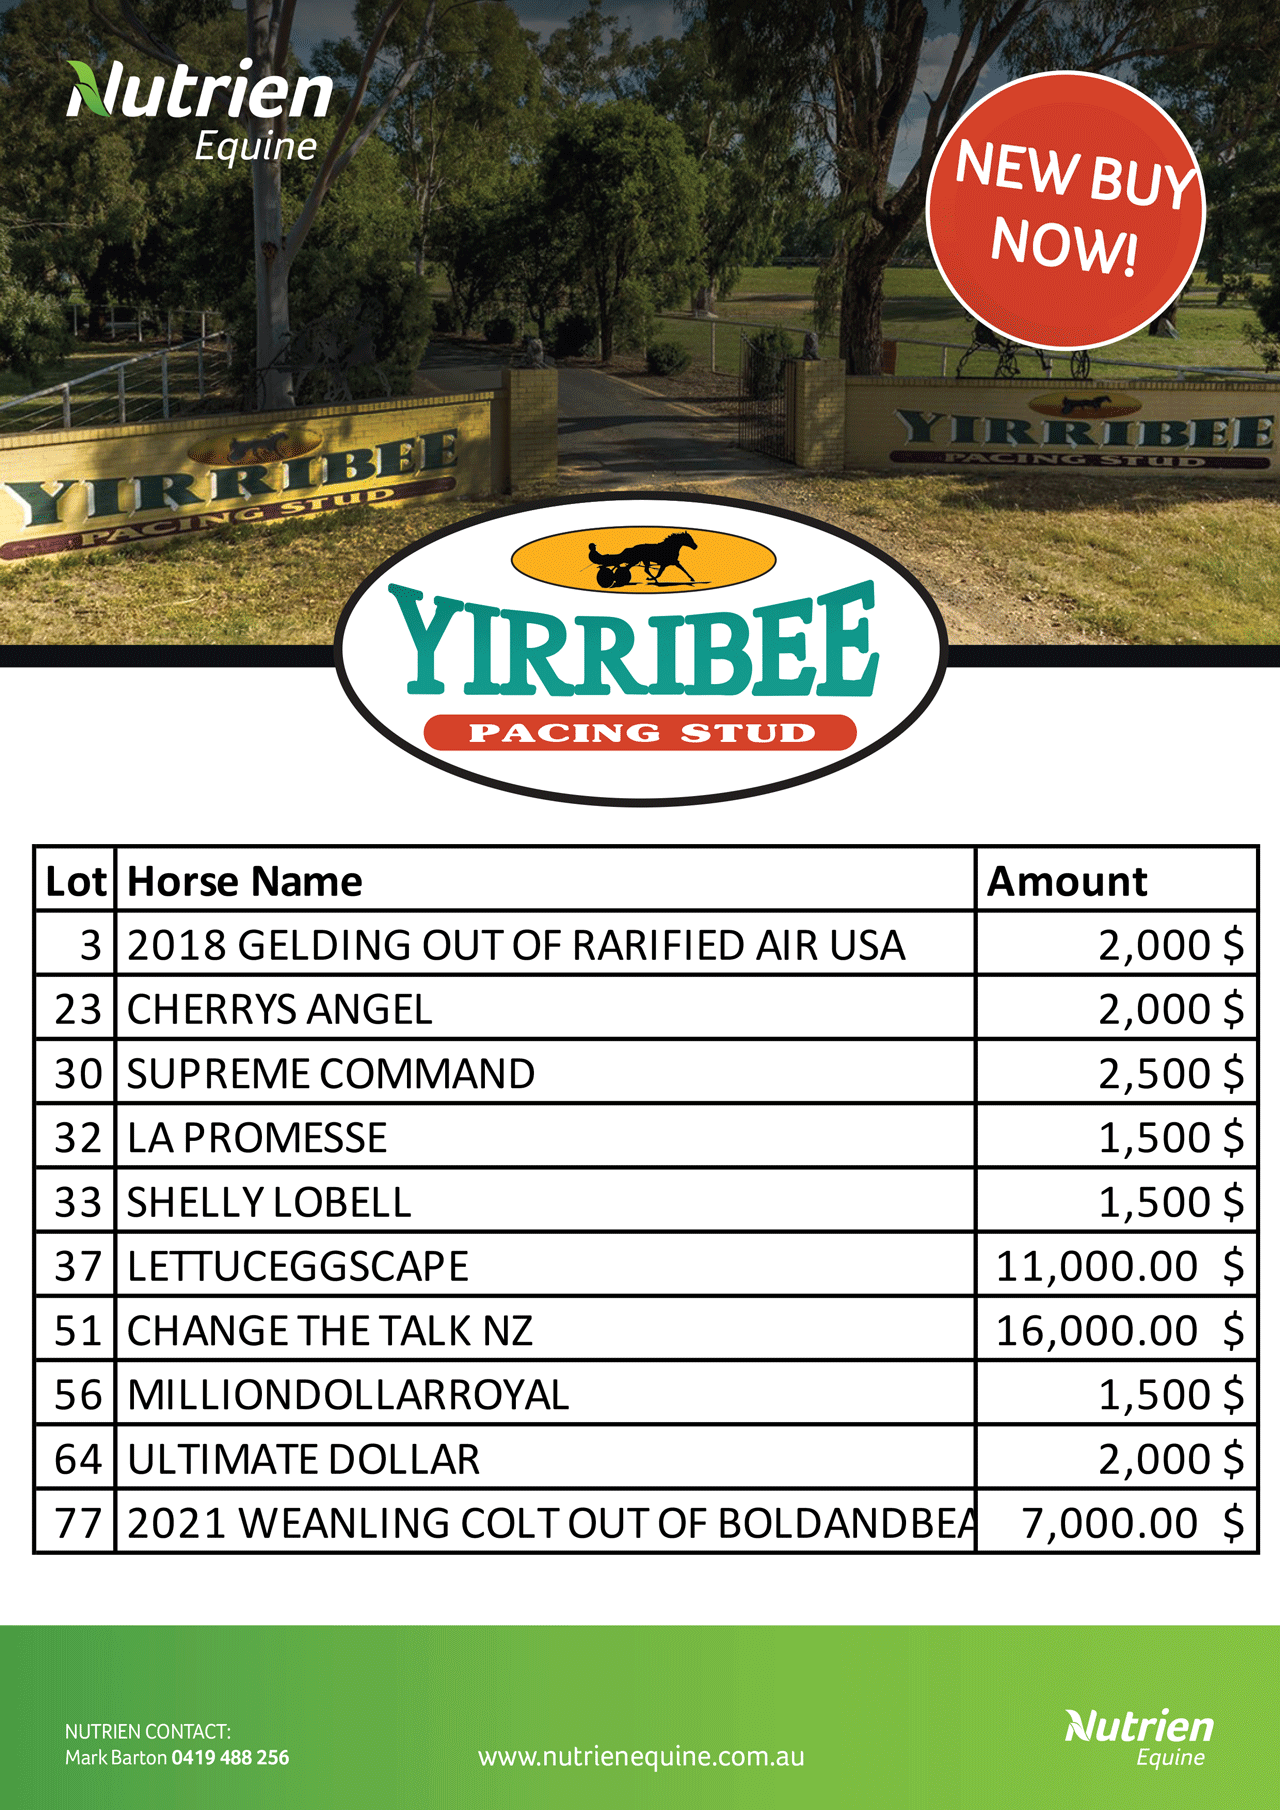 Updated! Yirribee Dispersal Sale PRICED TO SELL